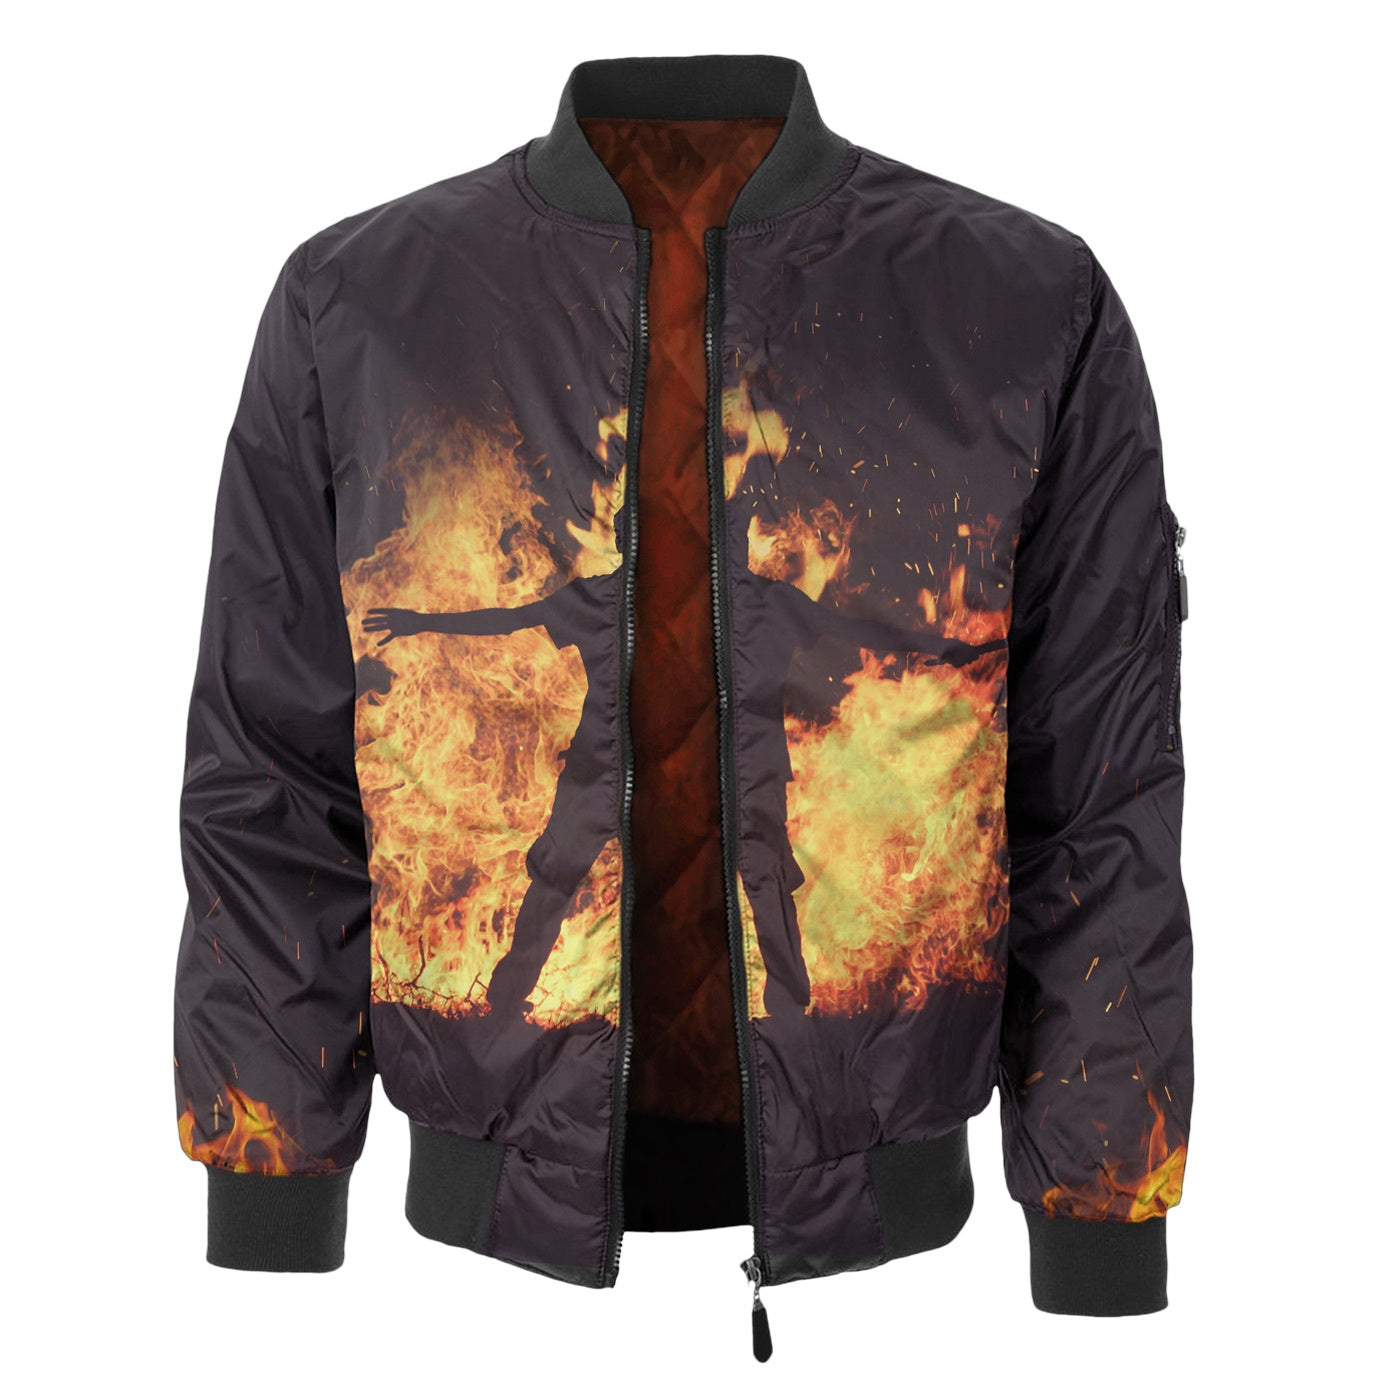 Fire In You Bomber Jacket